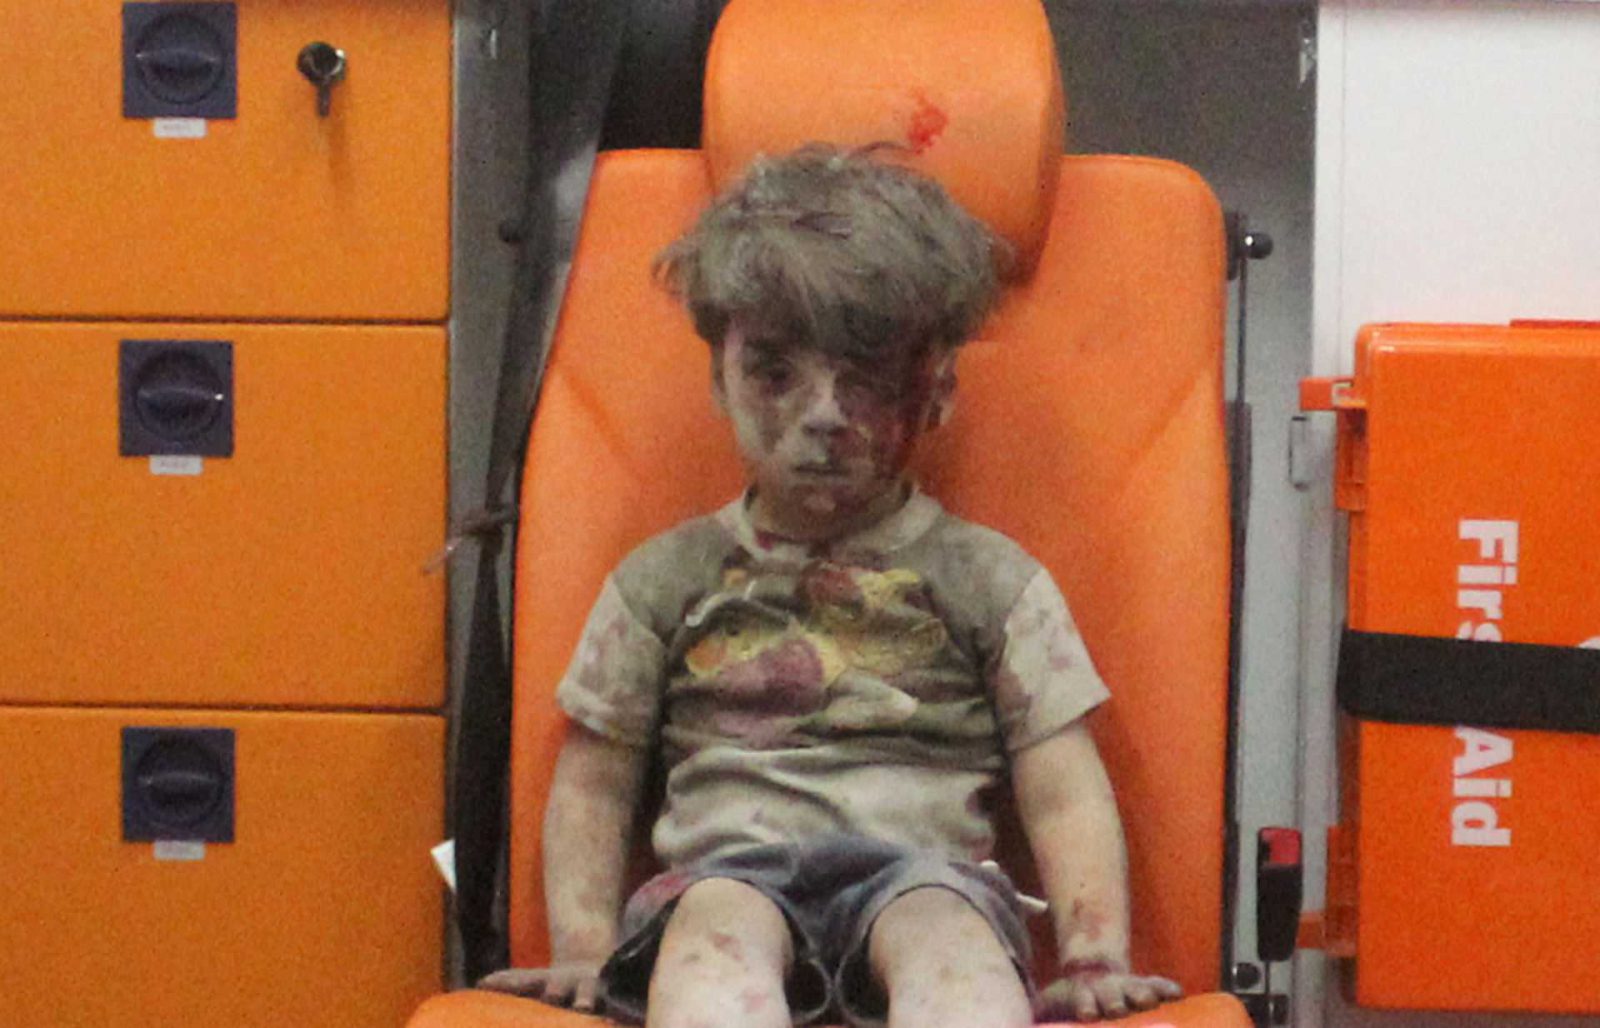 Five-year-old Omran Daqneesh, with bloodied face, sits inside an ambulance after he was rescued following an airstrike in the rebel-held al-Qaterji neighbourhood of Aleppo, Syria August 17, 2016. Picture taken August 17, 2016. REUTERS/Mahmoud Rslan EDITORIAL USE ONLY. NO RESALES. NO ARCHIVES TPX IMAGES OF THE DAY